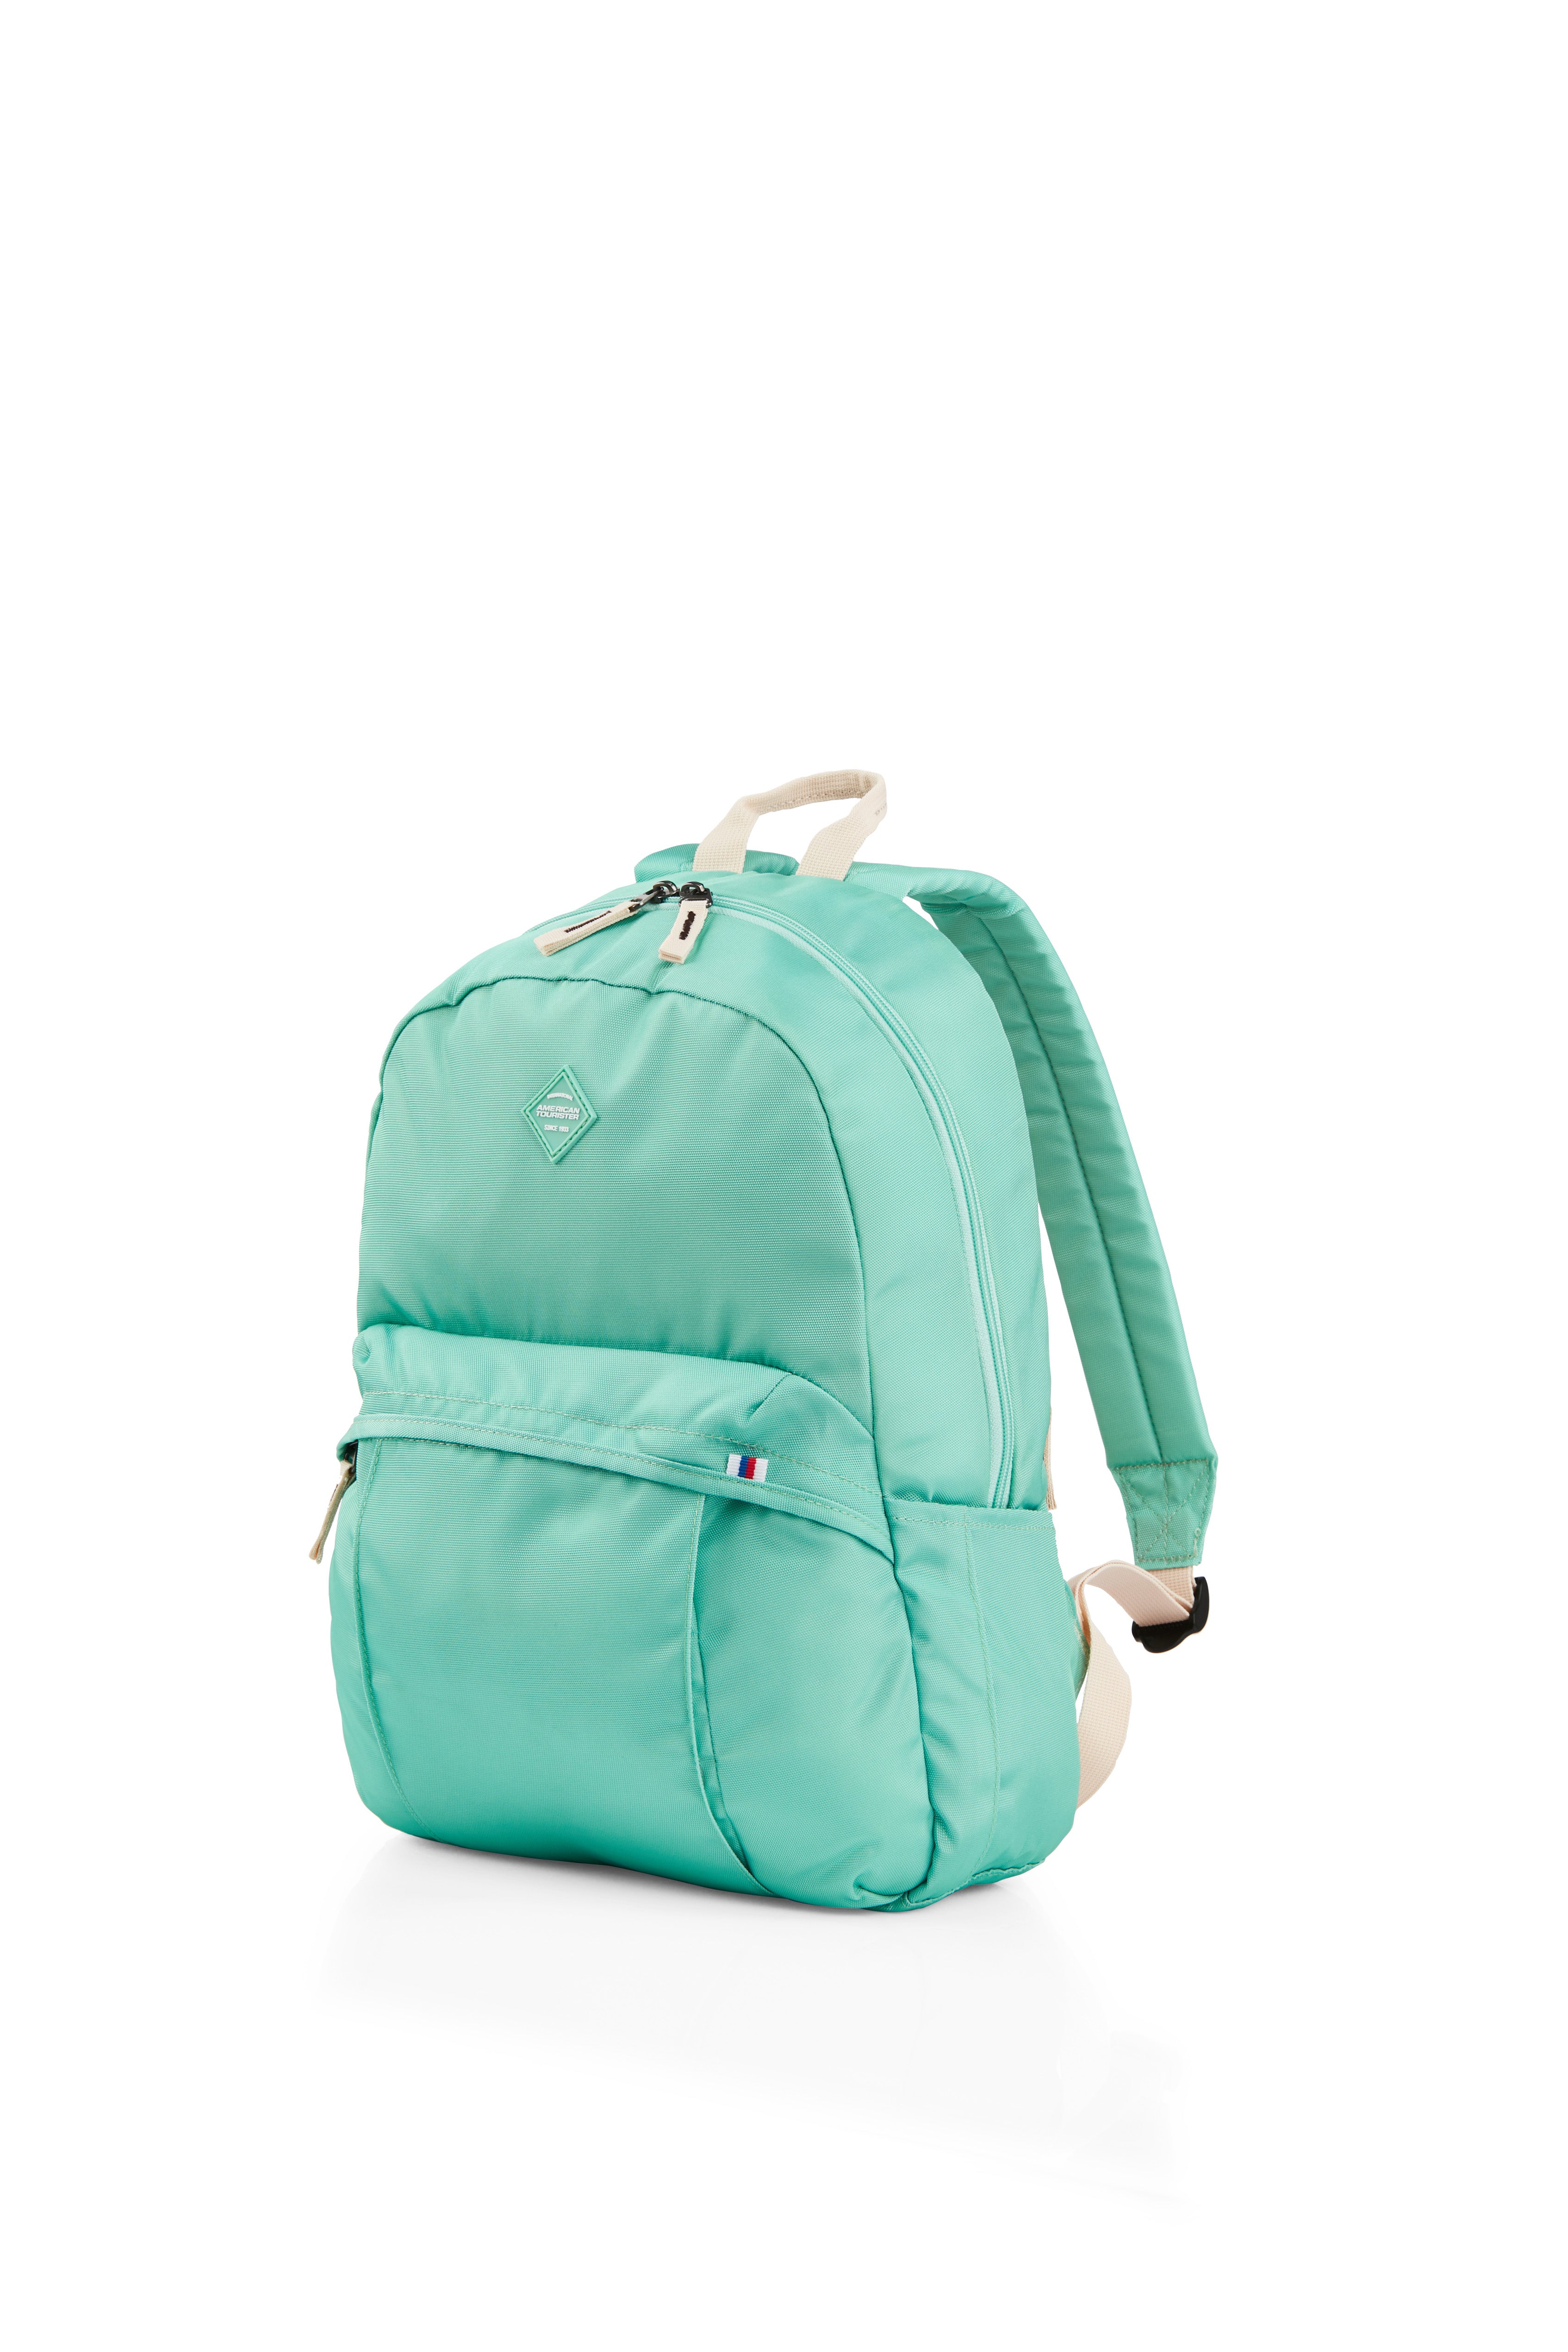 American Tourister - RUDY Small Fashion Backpack - Ice Mint